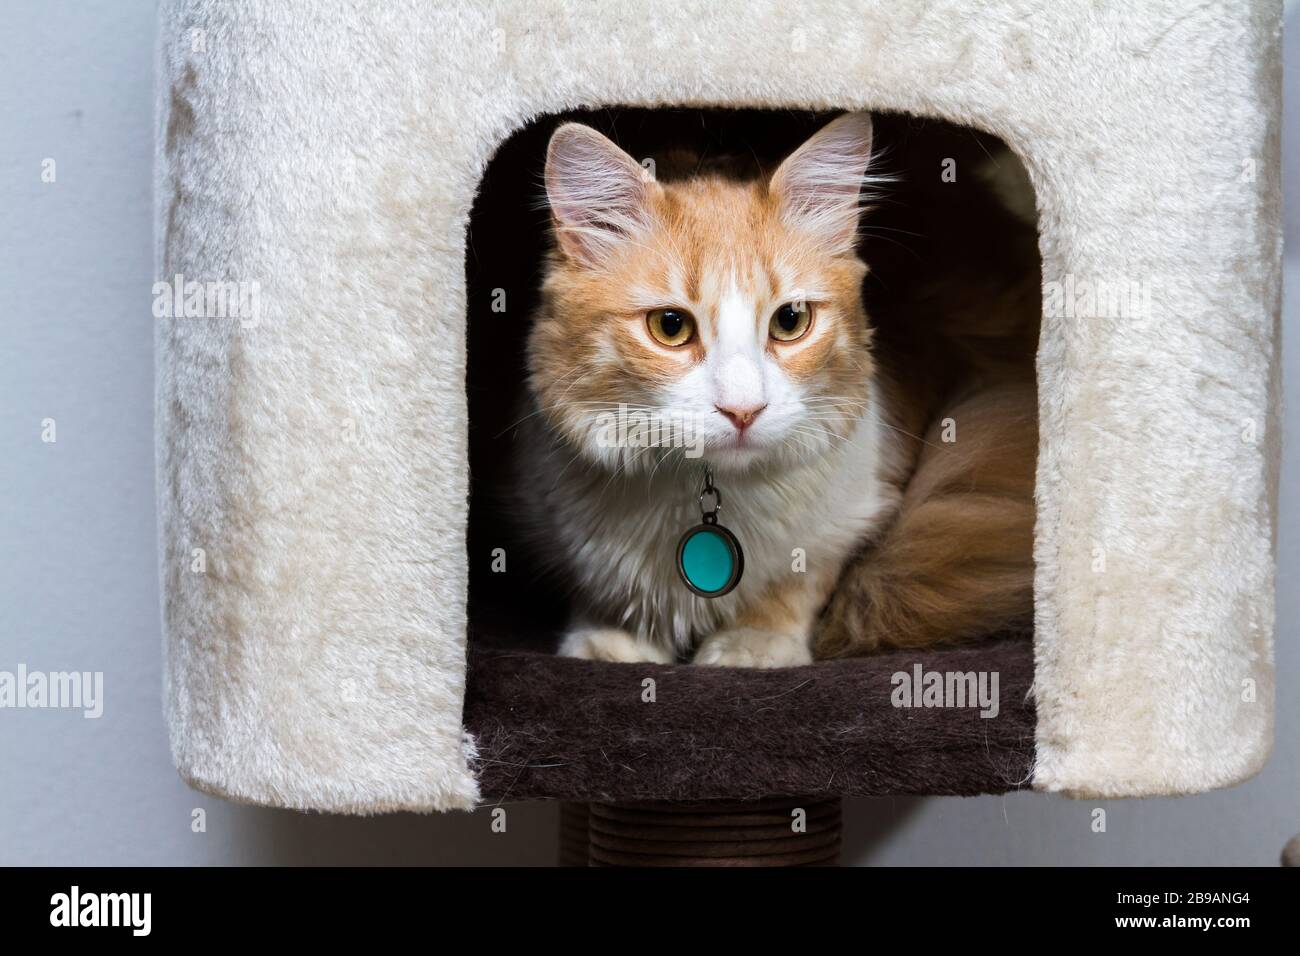 Close Up Of A Beautiful Orange And White Cat Wearing A Name Tag In A Dark  Home Setting Stock Photo - Alamy